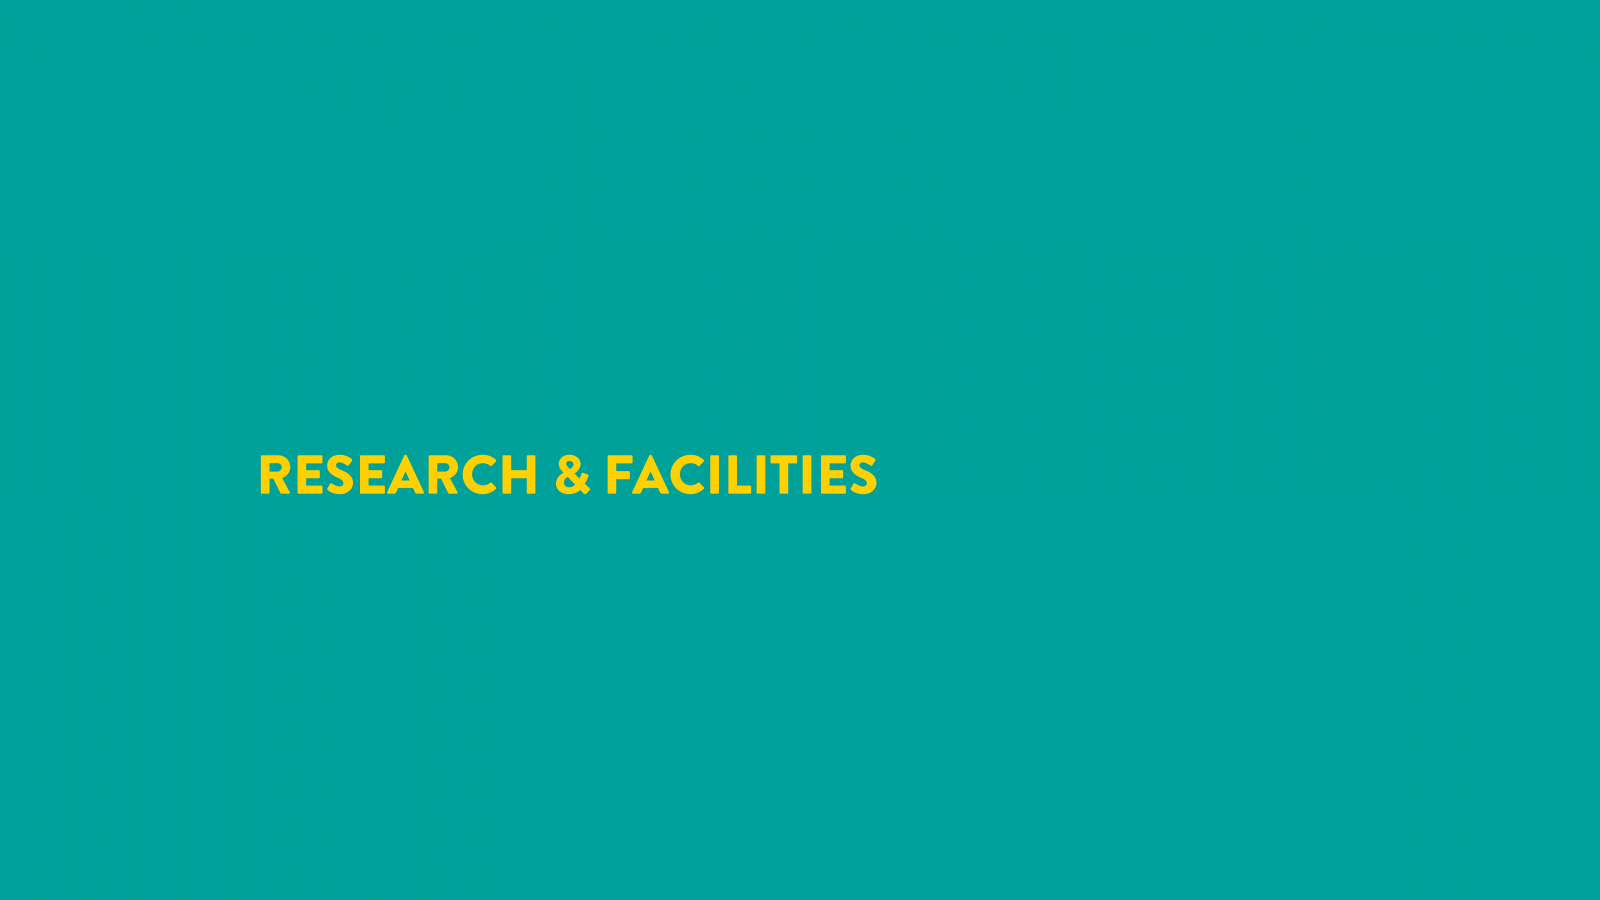 Research & Facilities